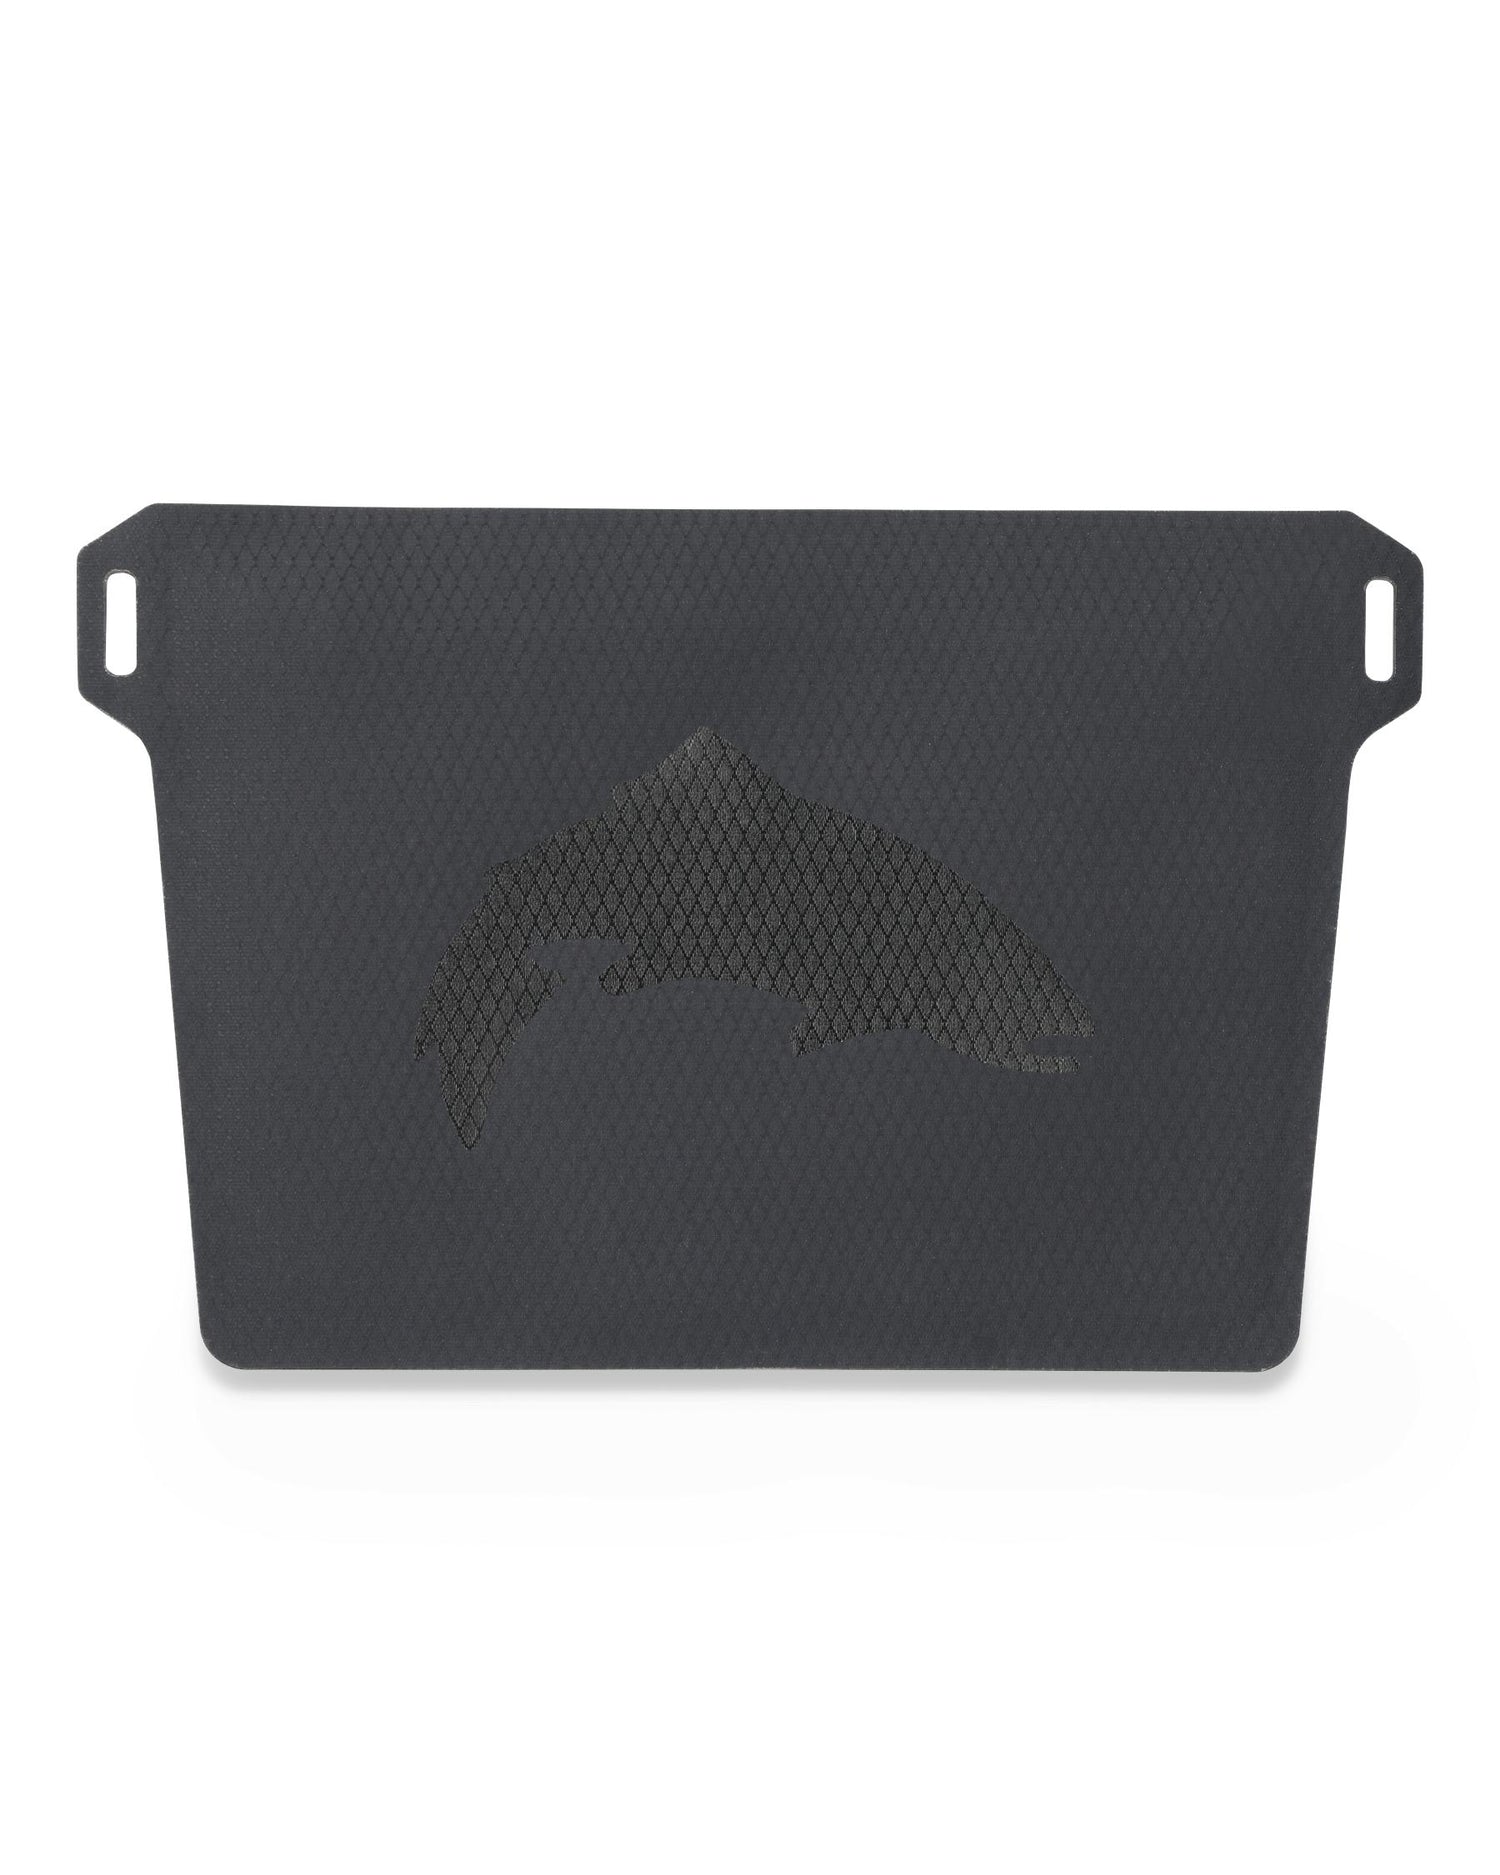 Dry Creek Tech Pouch  Simms Fishing Products